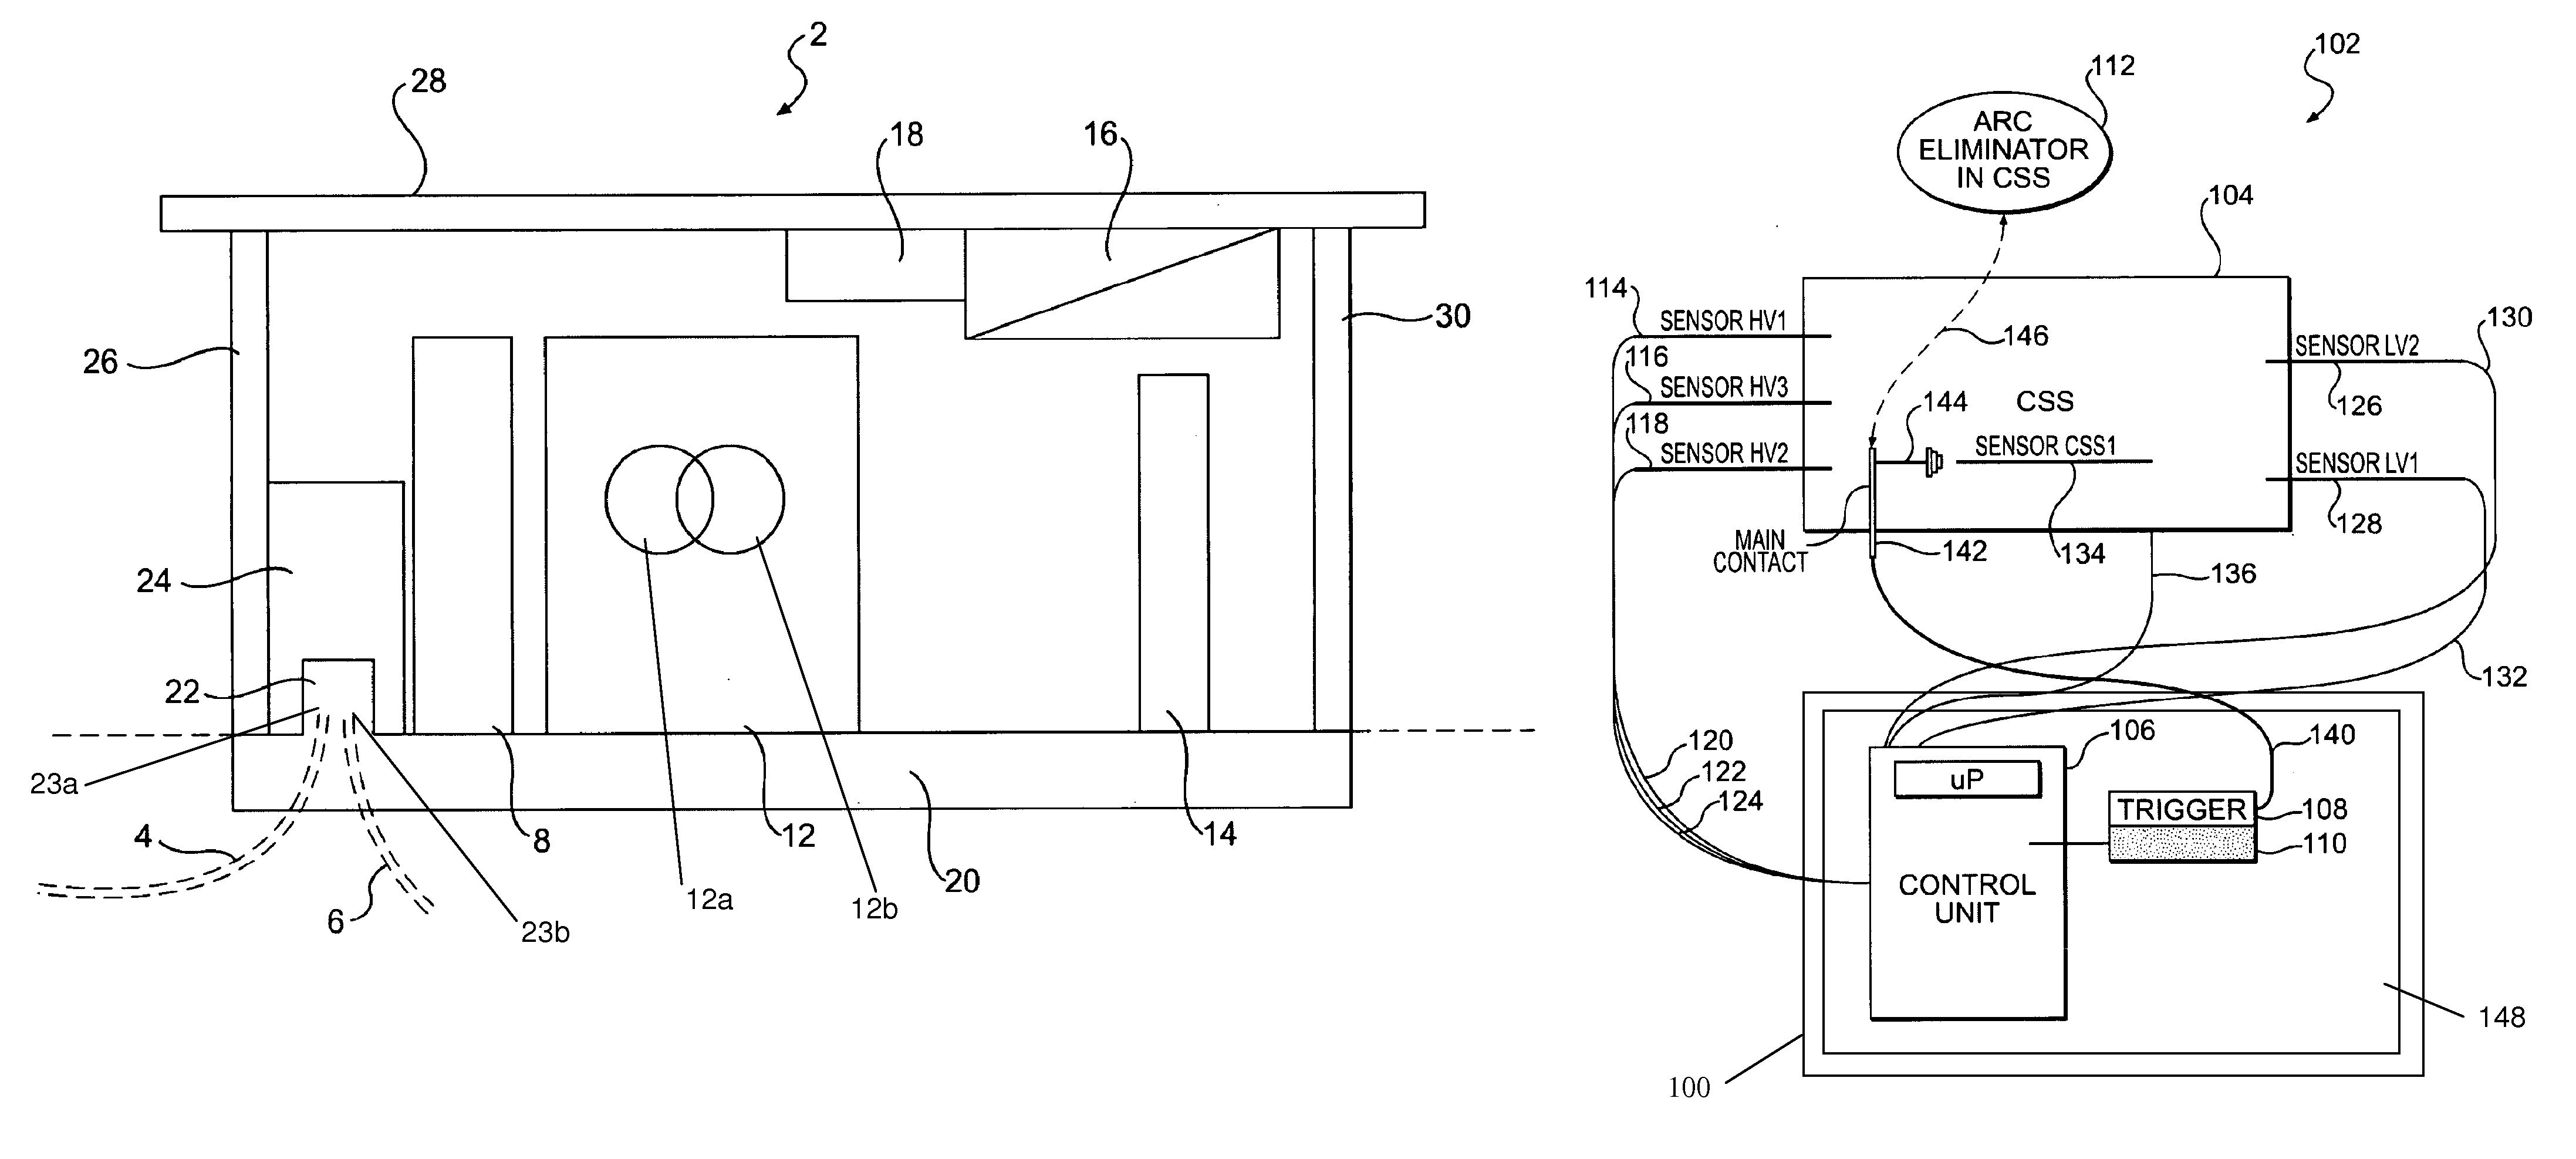 Method for operating a sealed for life compact secondary substation